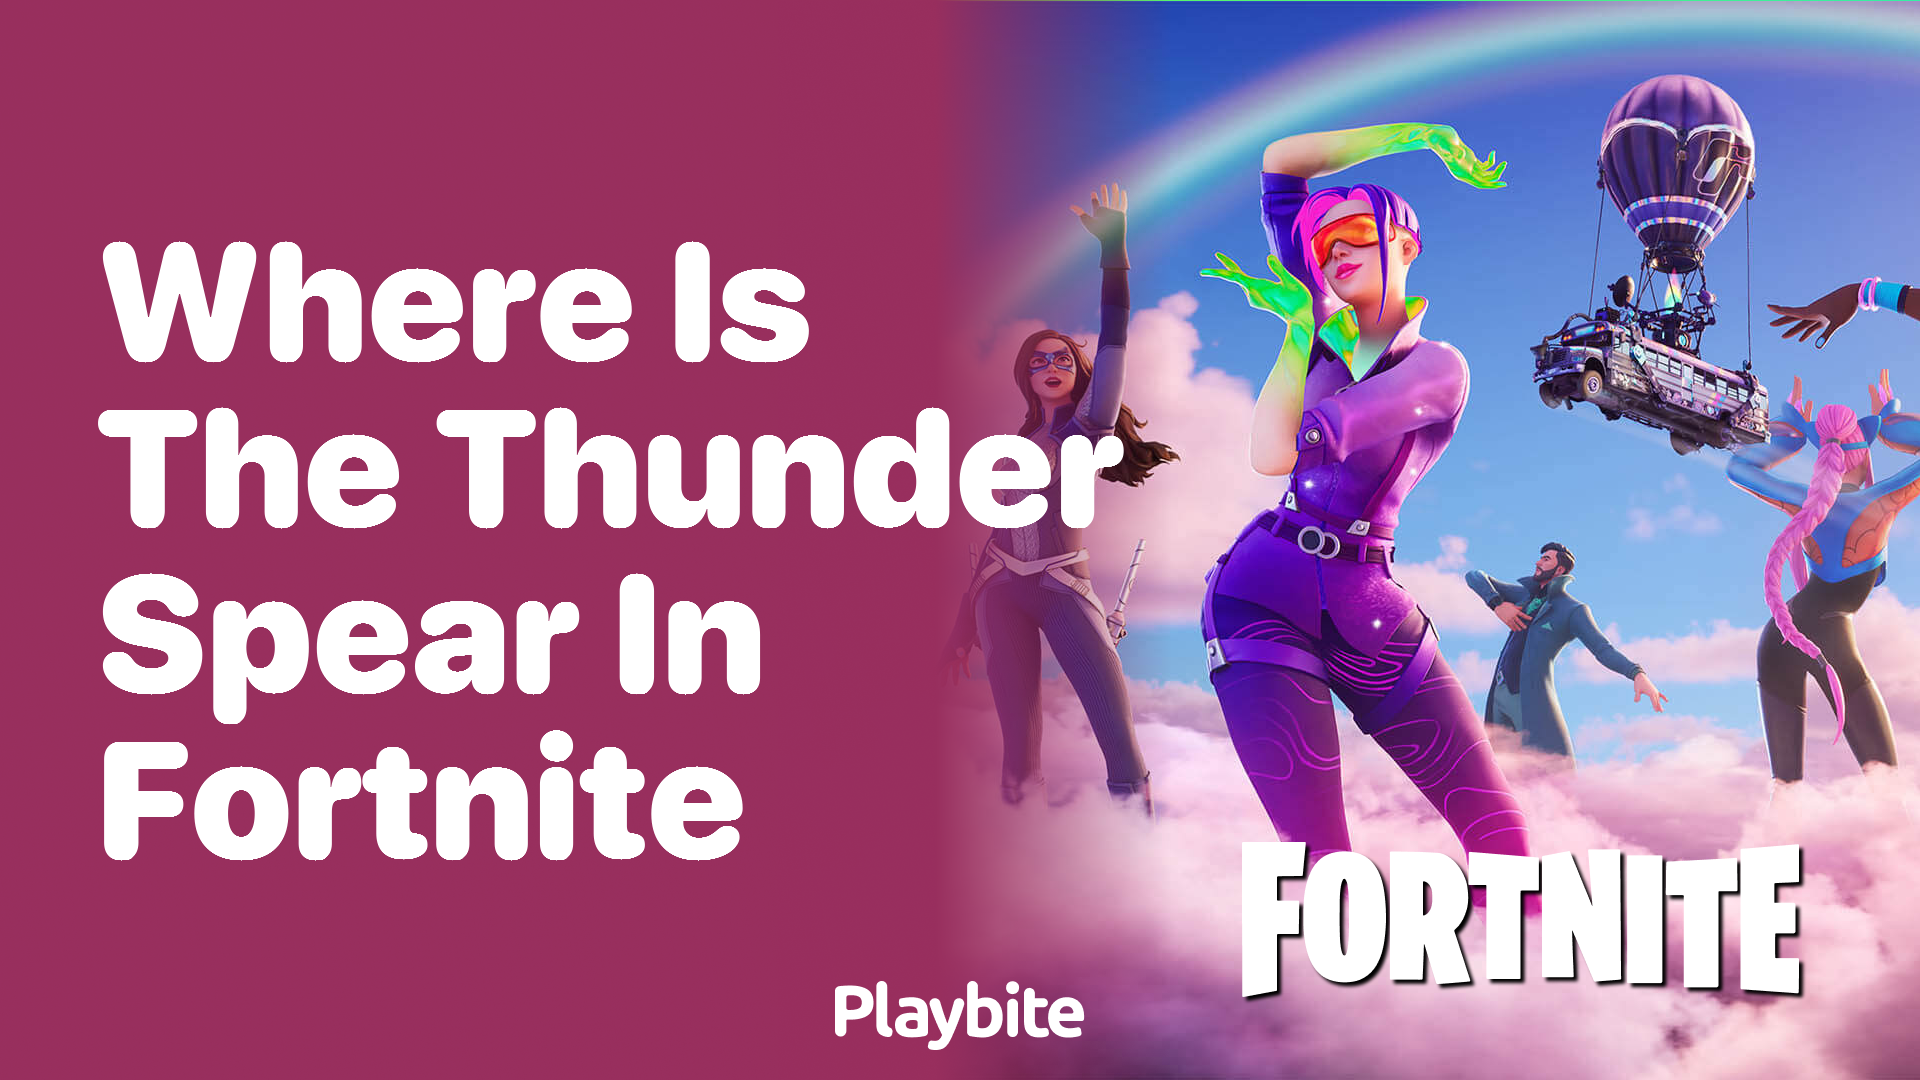 Where is the Thunder Spear in Fortnite? Find Out Here!